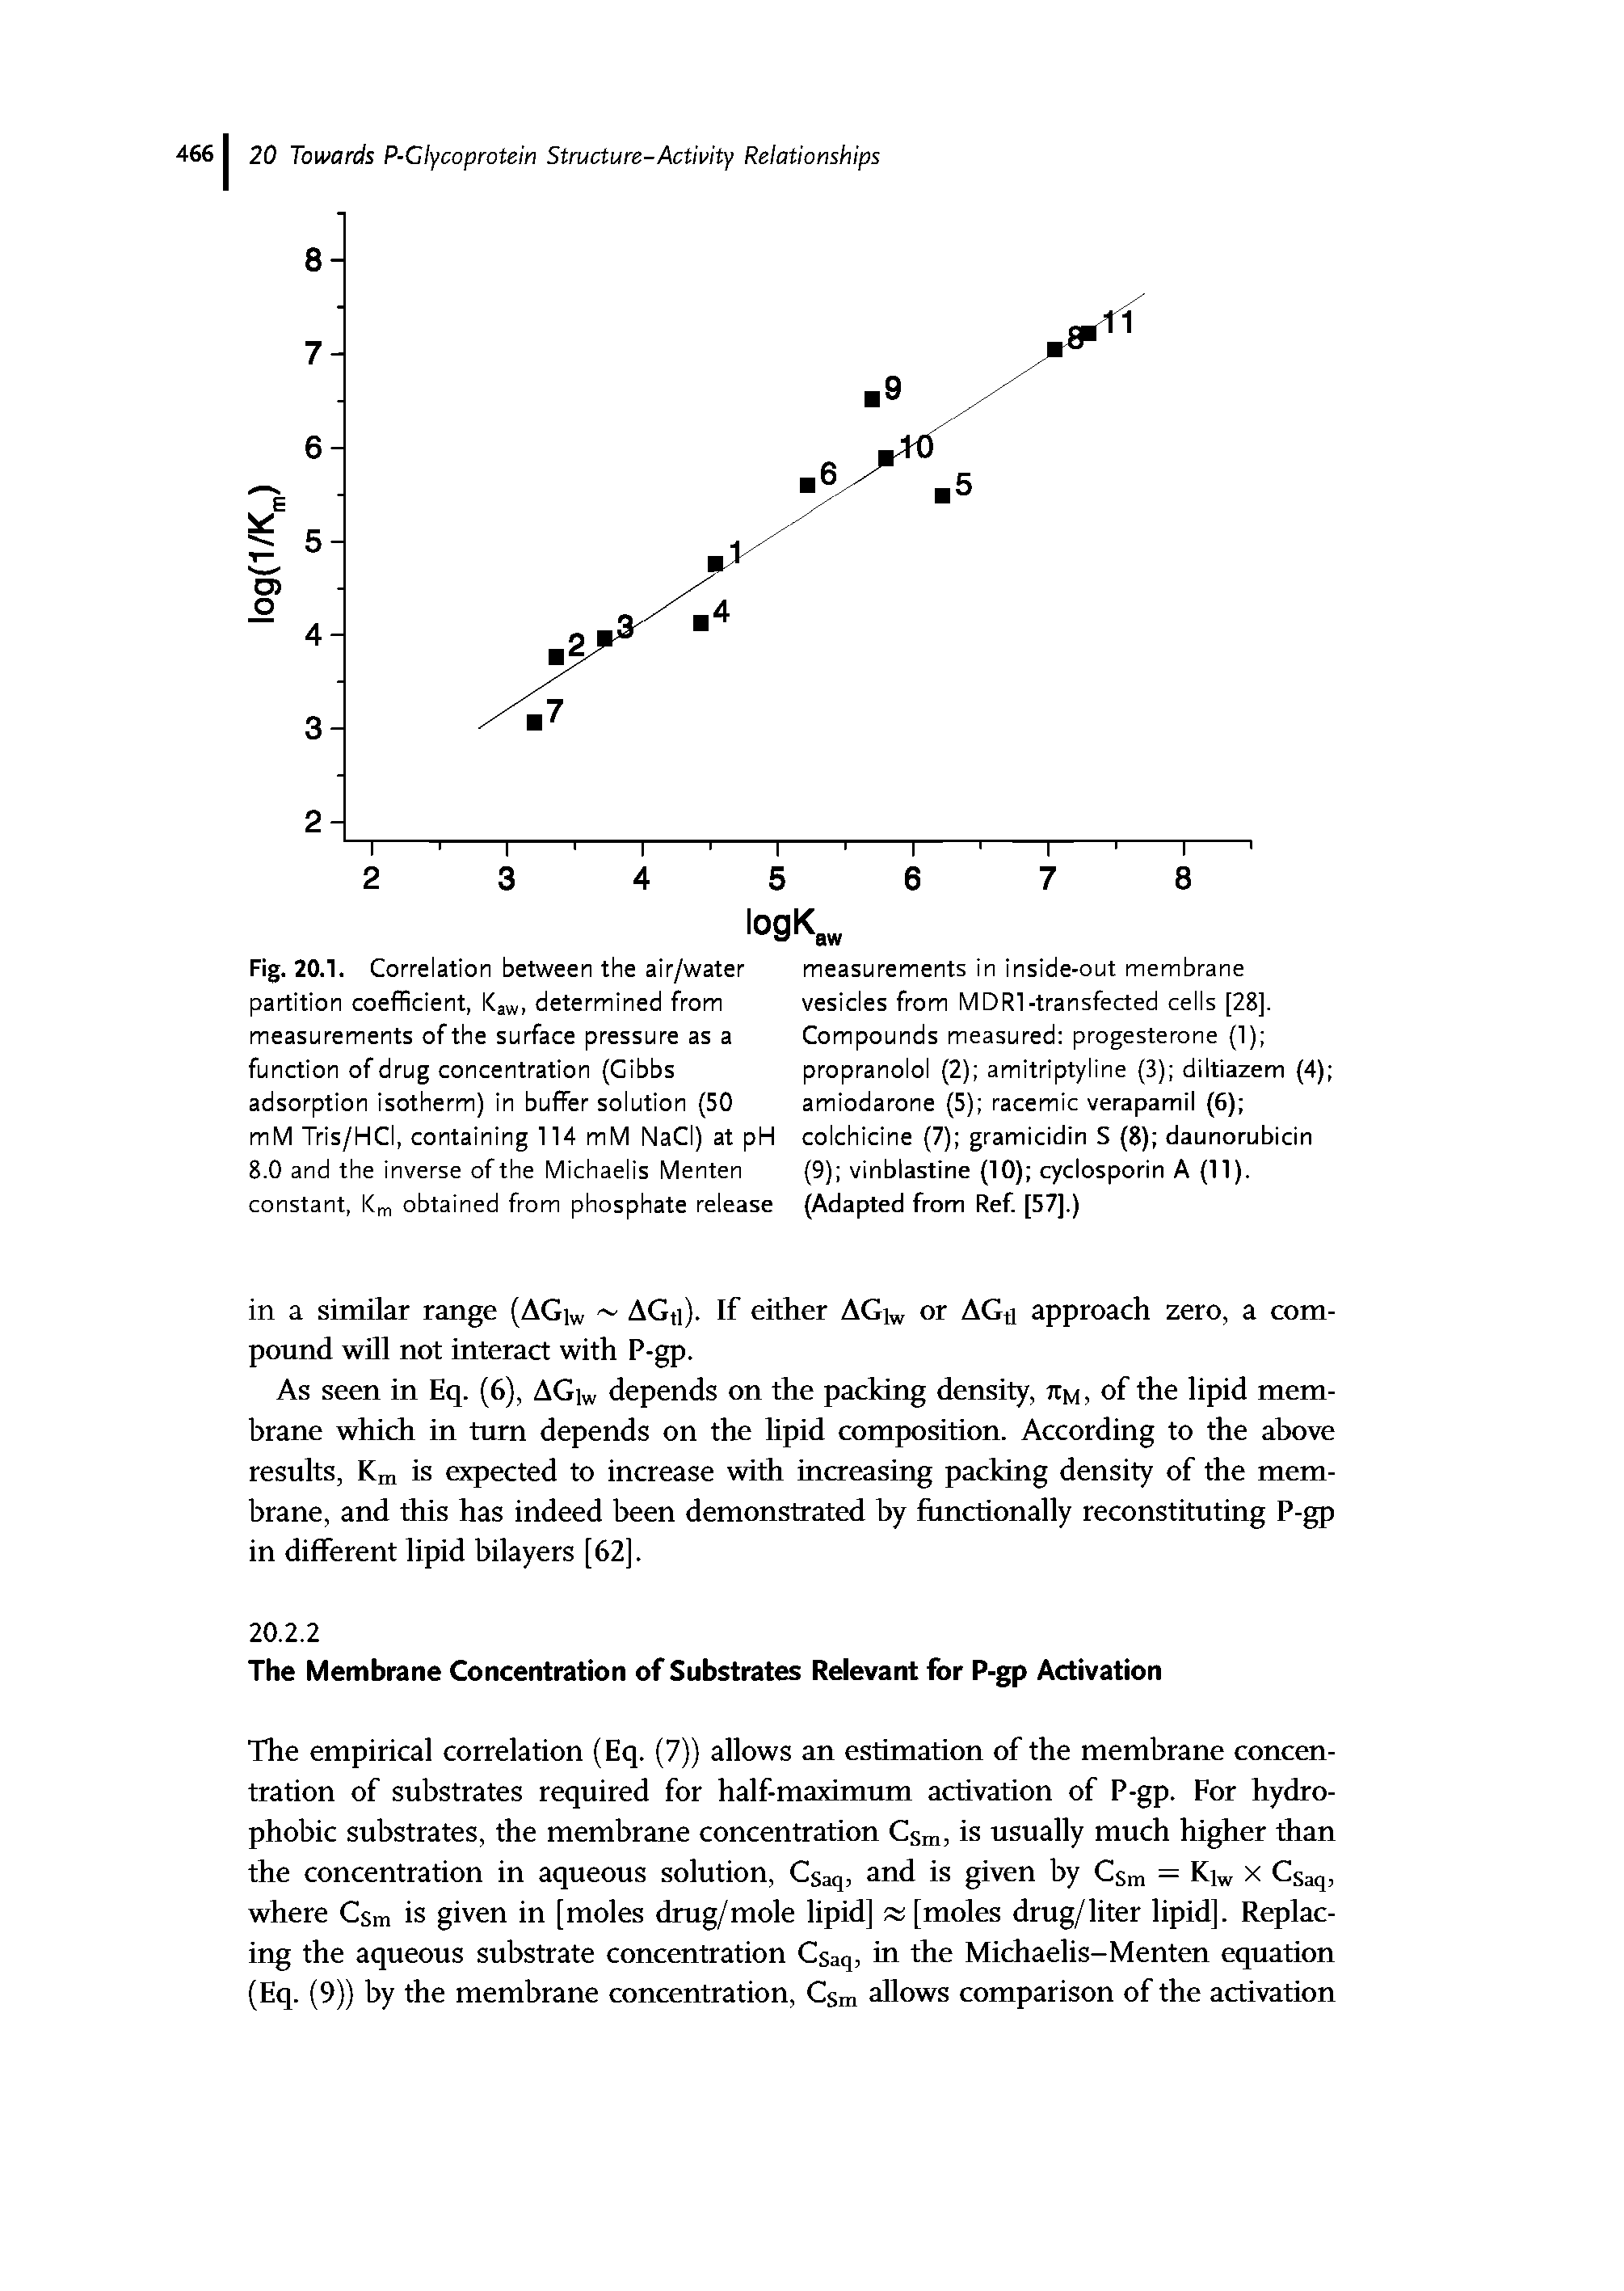 Fig. 20.1. Correlation between the air/water partition coefficient, Kaw, determined from measurements of the surface pressure as a function of drug concentration (Gibbs adsorption isotherm) in buffer solution (50 mM Tris/HCI, containing 114 mM NaCI) at pH 8.0 and the inverse of the Michaelis Menten constant, Km obtained from phosphate release...